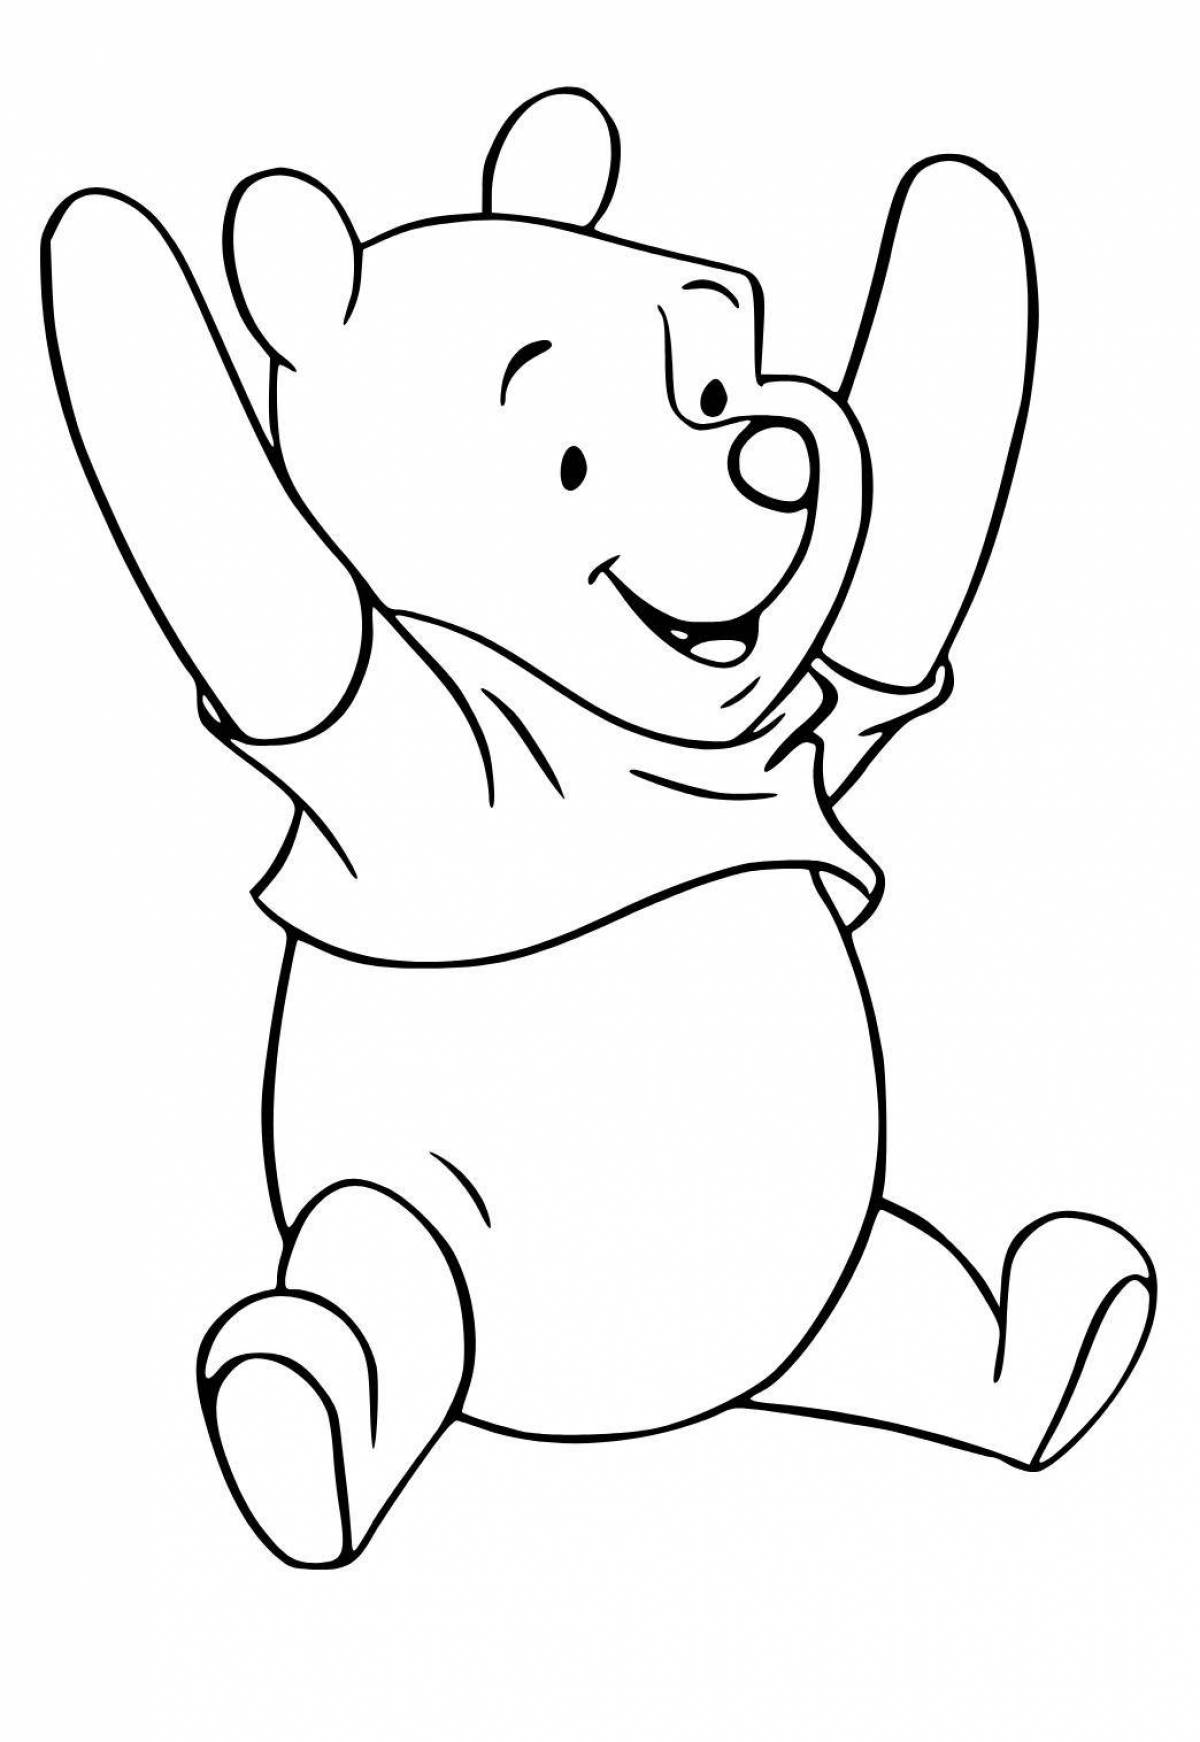 Exquisite winnie the pooh coloring book